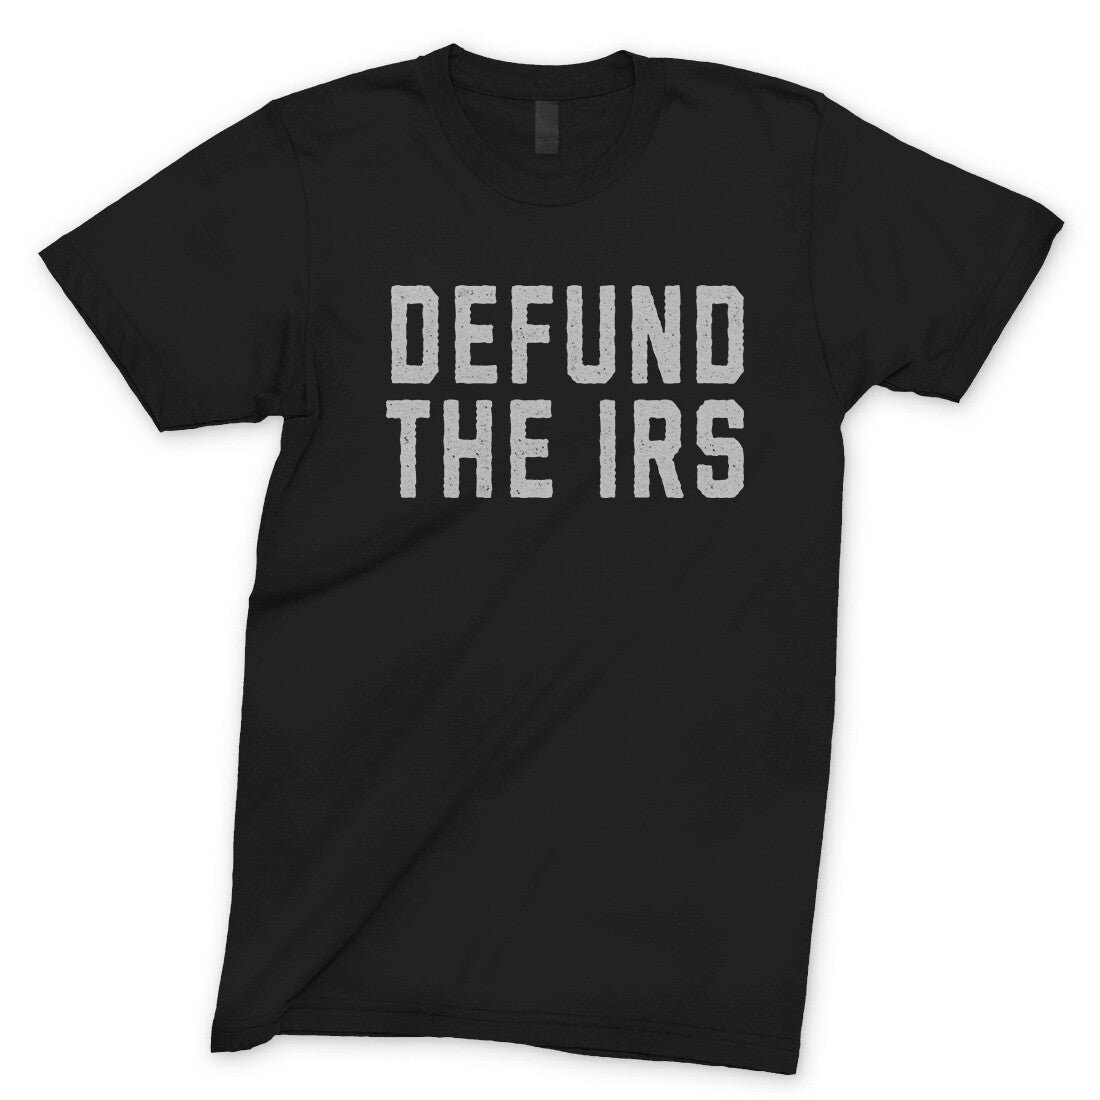 Defund the IRS in Black Color